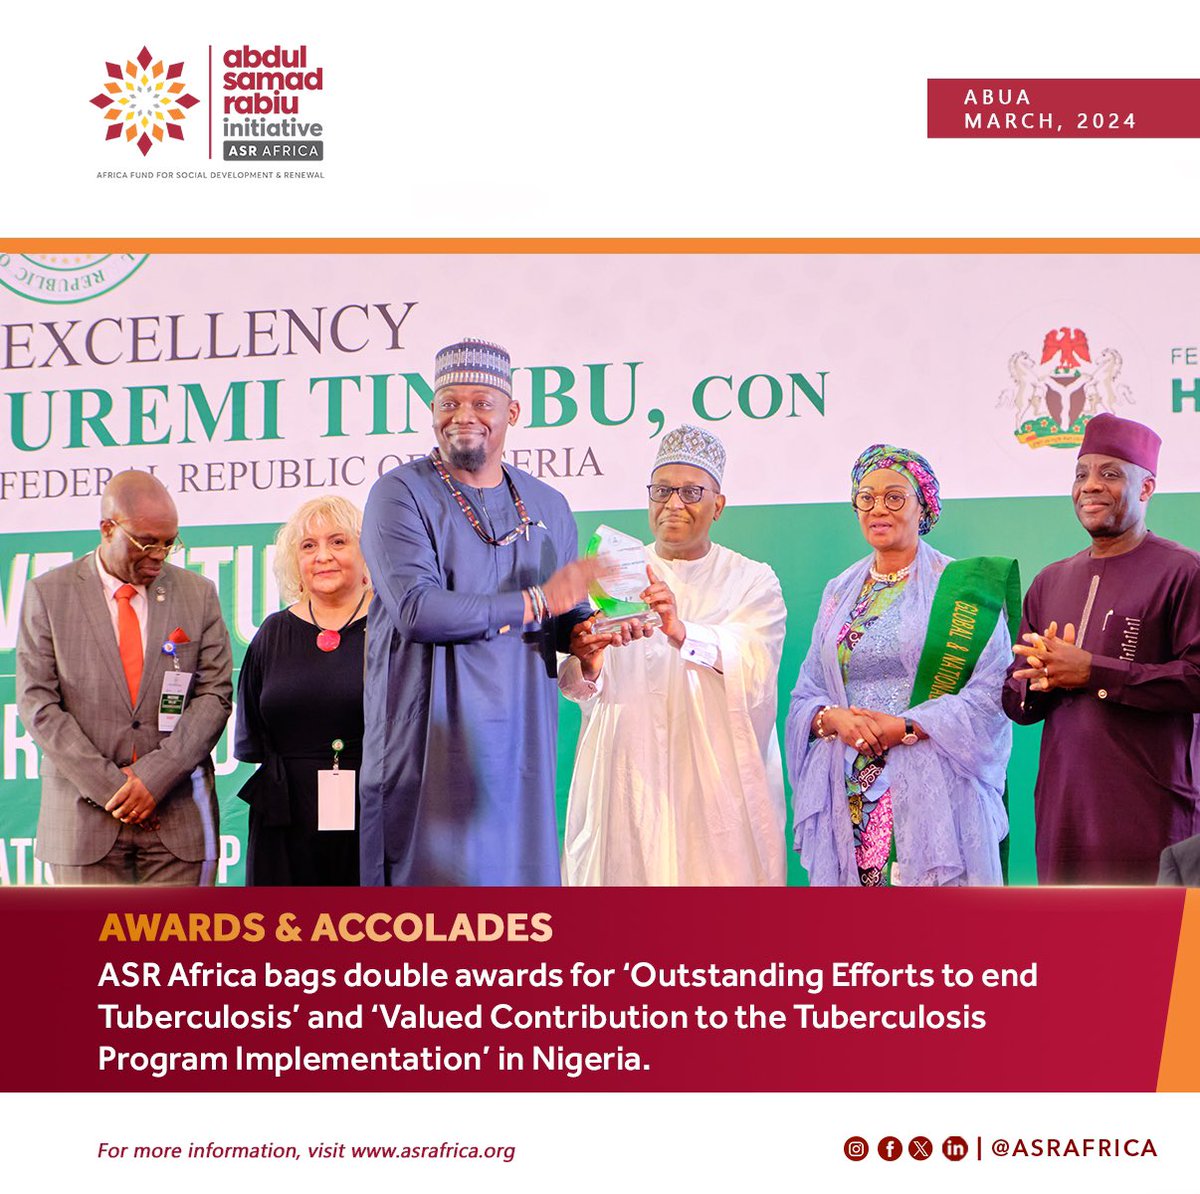 The First Lady of Nigeria, Her Excellency Senator Oluremi Tinubu, CON, has honored ASR Africa with an award for our outstanding efforts to end tuberculosis in Nigeria. Additionally, the National Tuberculosis Leprosy and Buruli Ulcer Control Program (NTLBCP), under the Federal